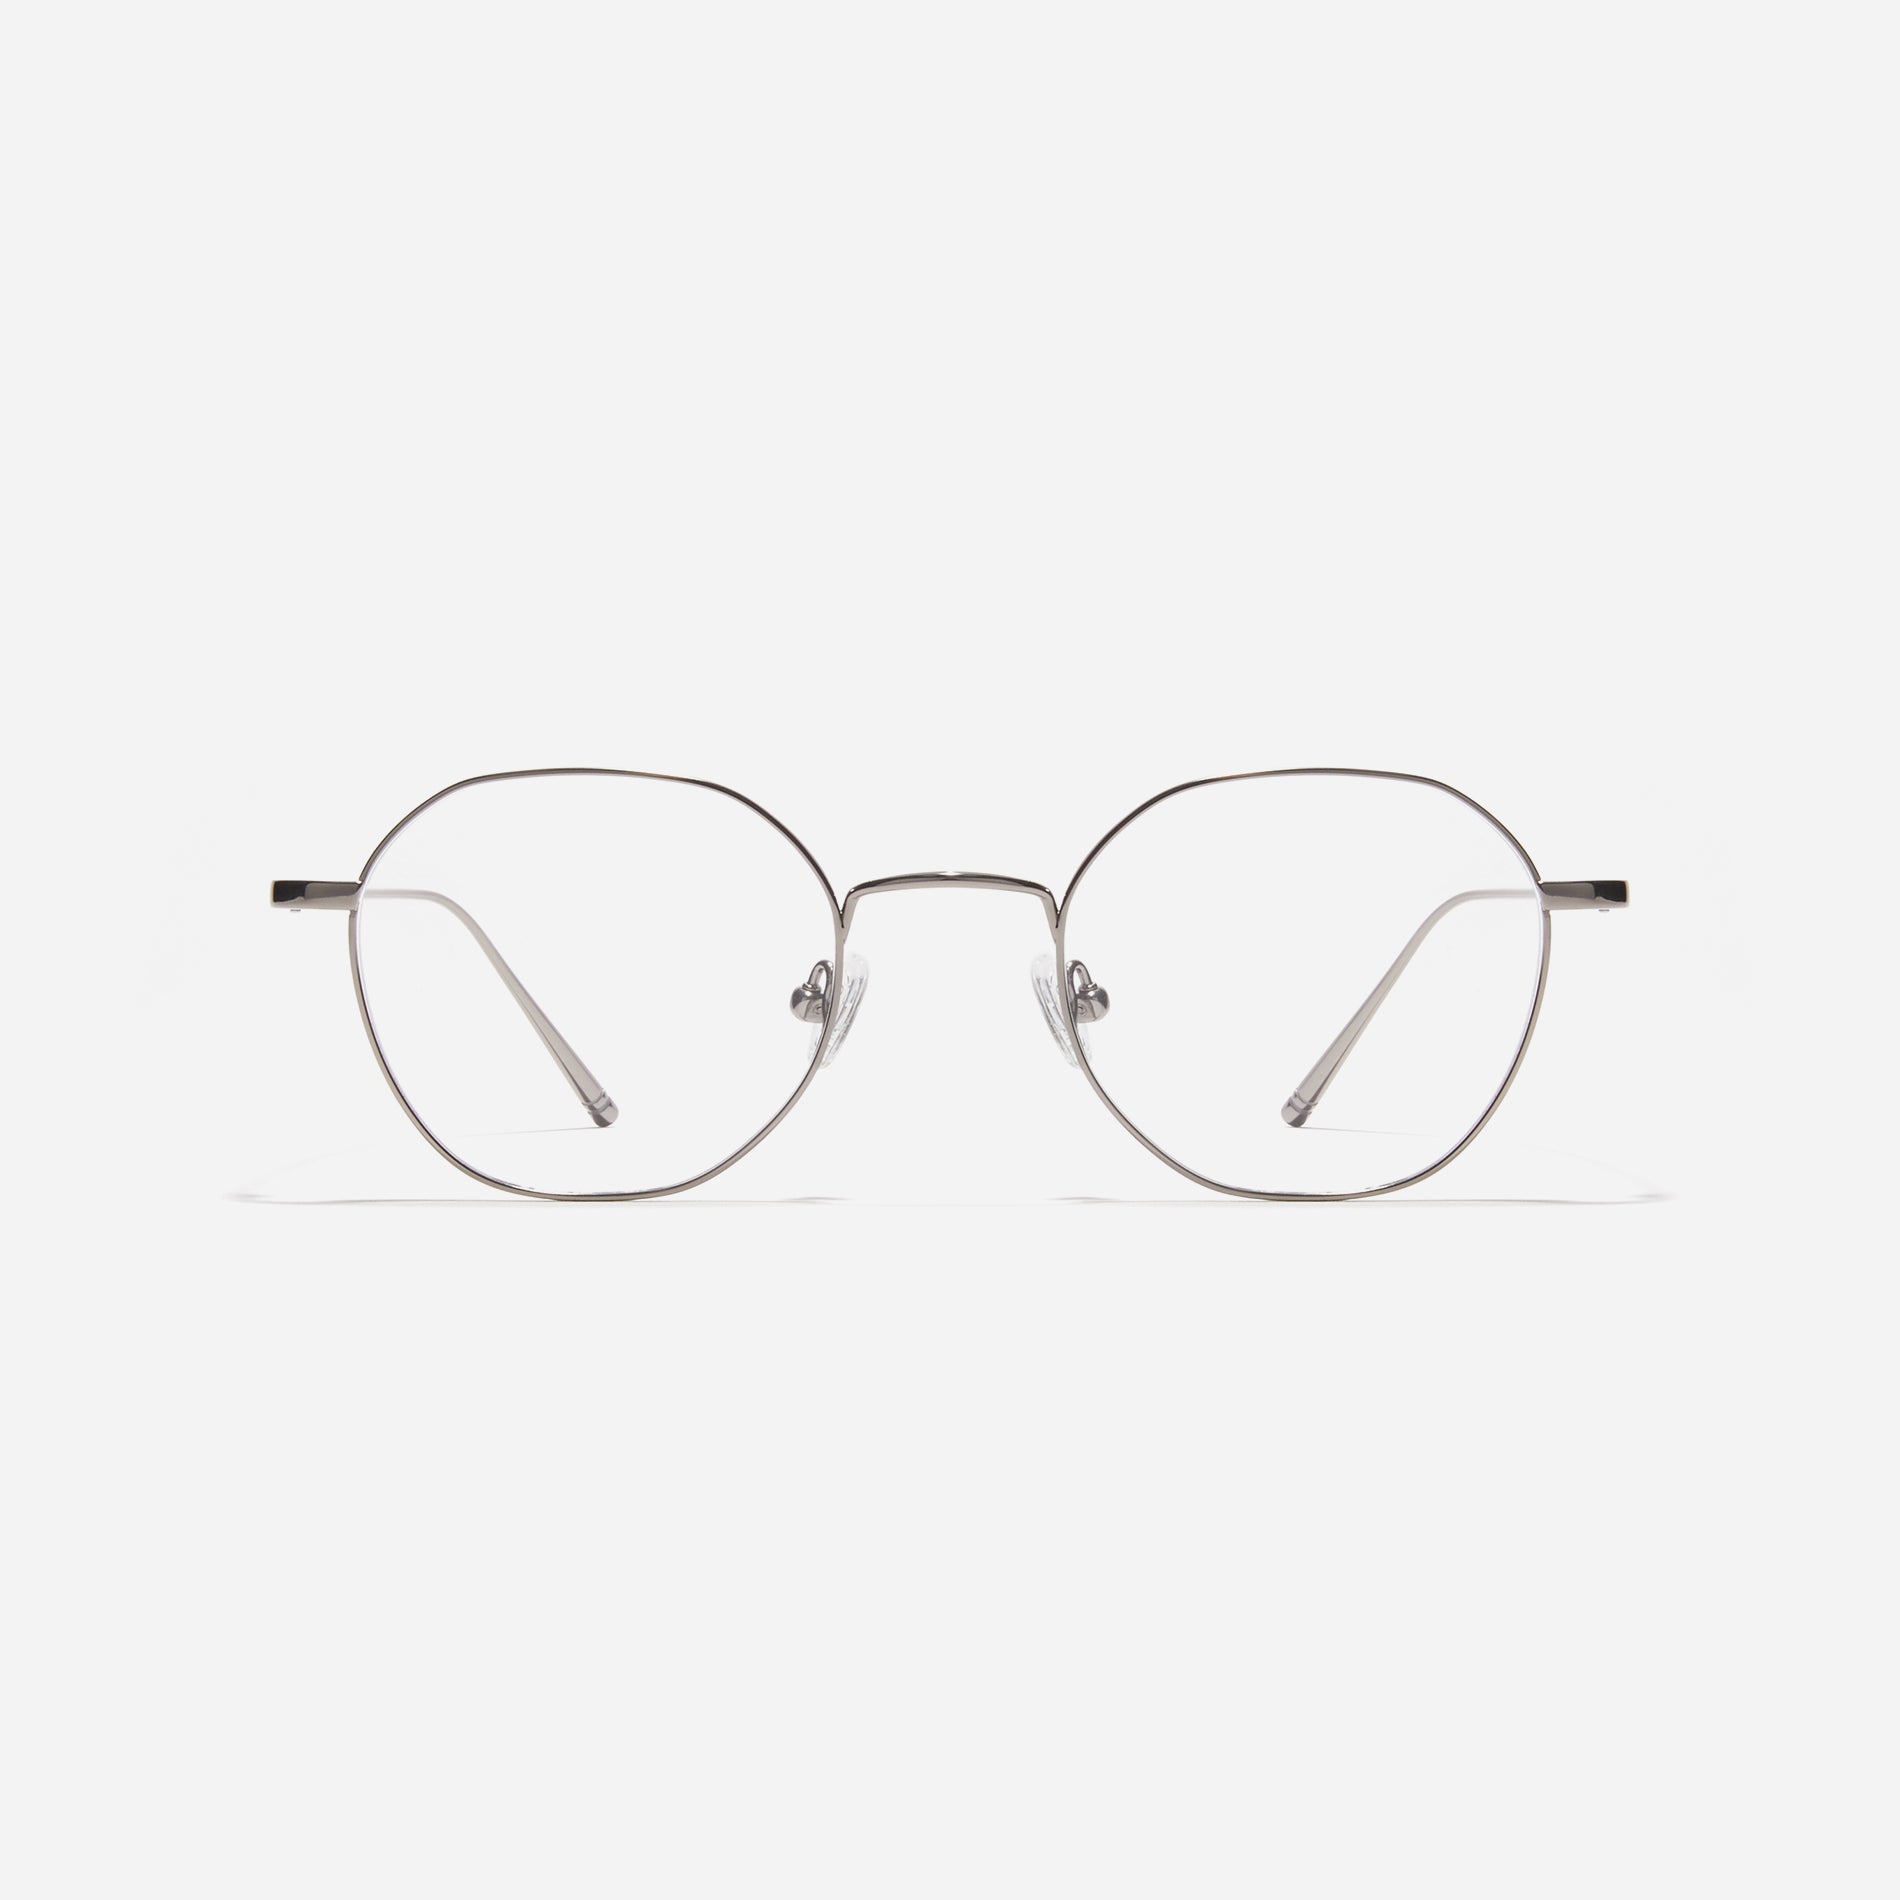 Gus H are hexagonal-shaped, full-metal eyeglasses with a dual-rim structure designed to accommodate thicker, high-prescription lenses. Both the frame and temples are made of pure titanium, ensuring a lightweight and comfortable fit.